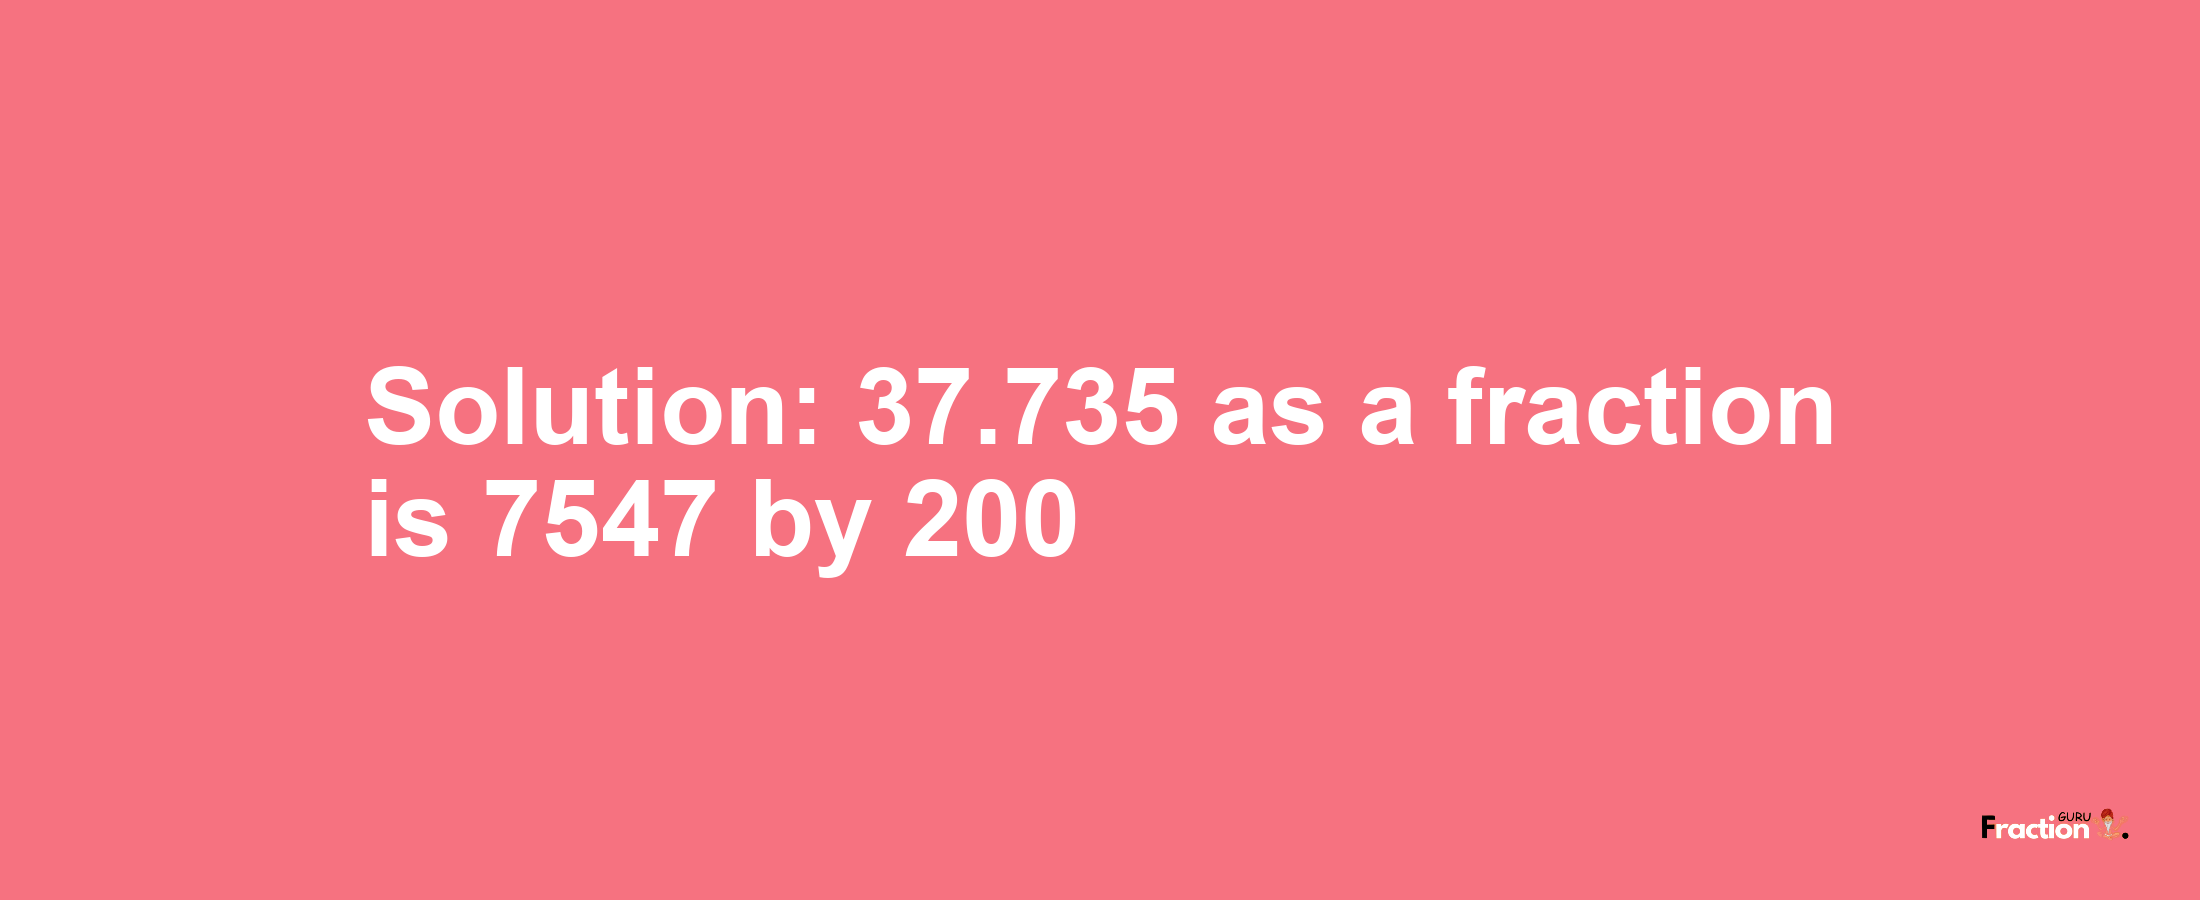 Solution:37.735 as a fraction is 7547/200